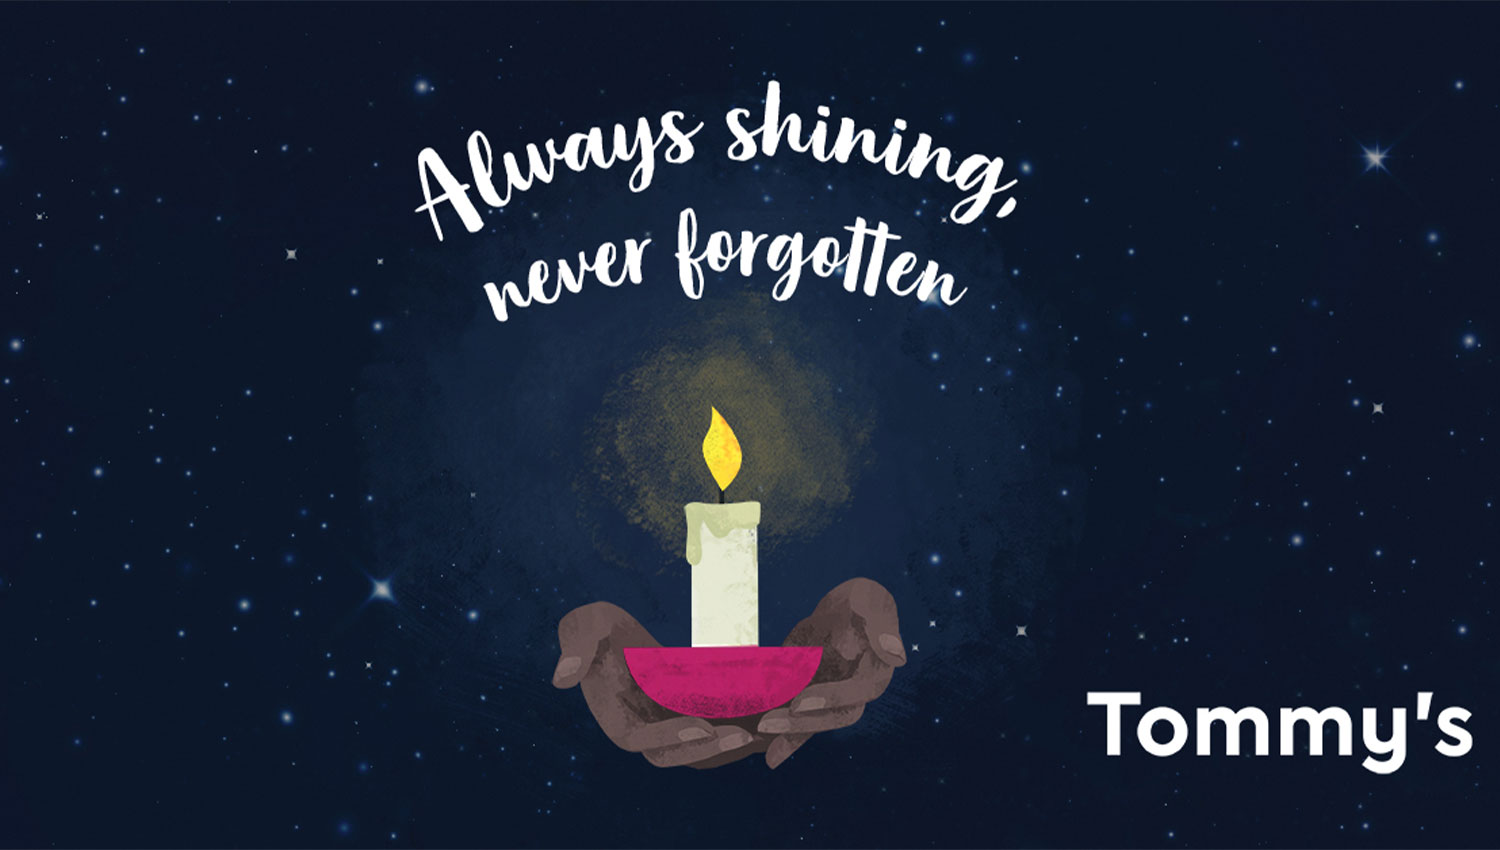 Baby Loss Awareness Week 2020 | Partnership with Tommy's